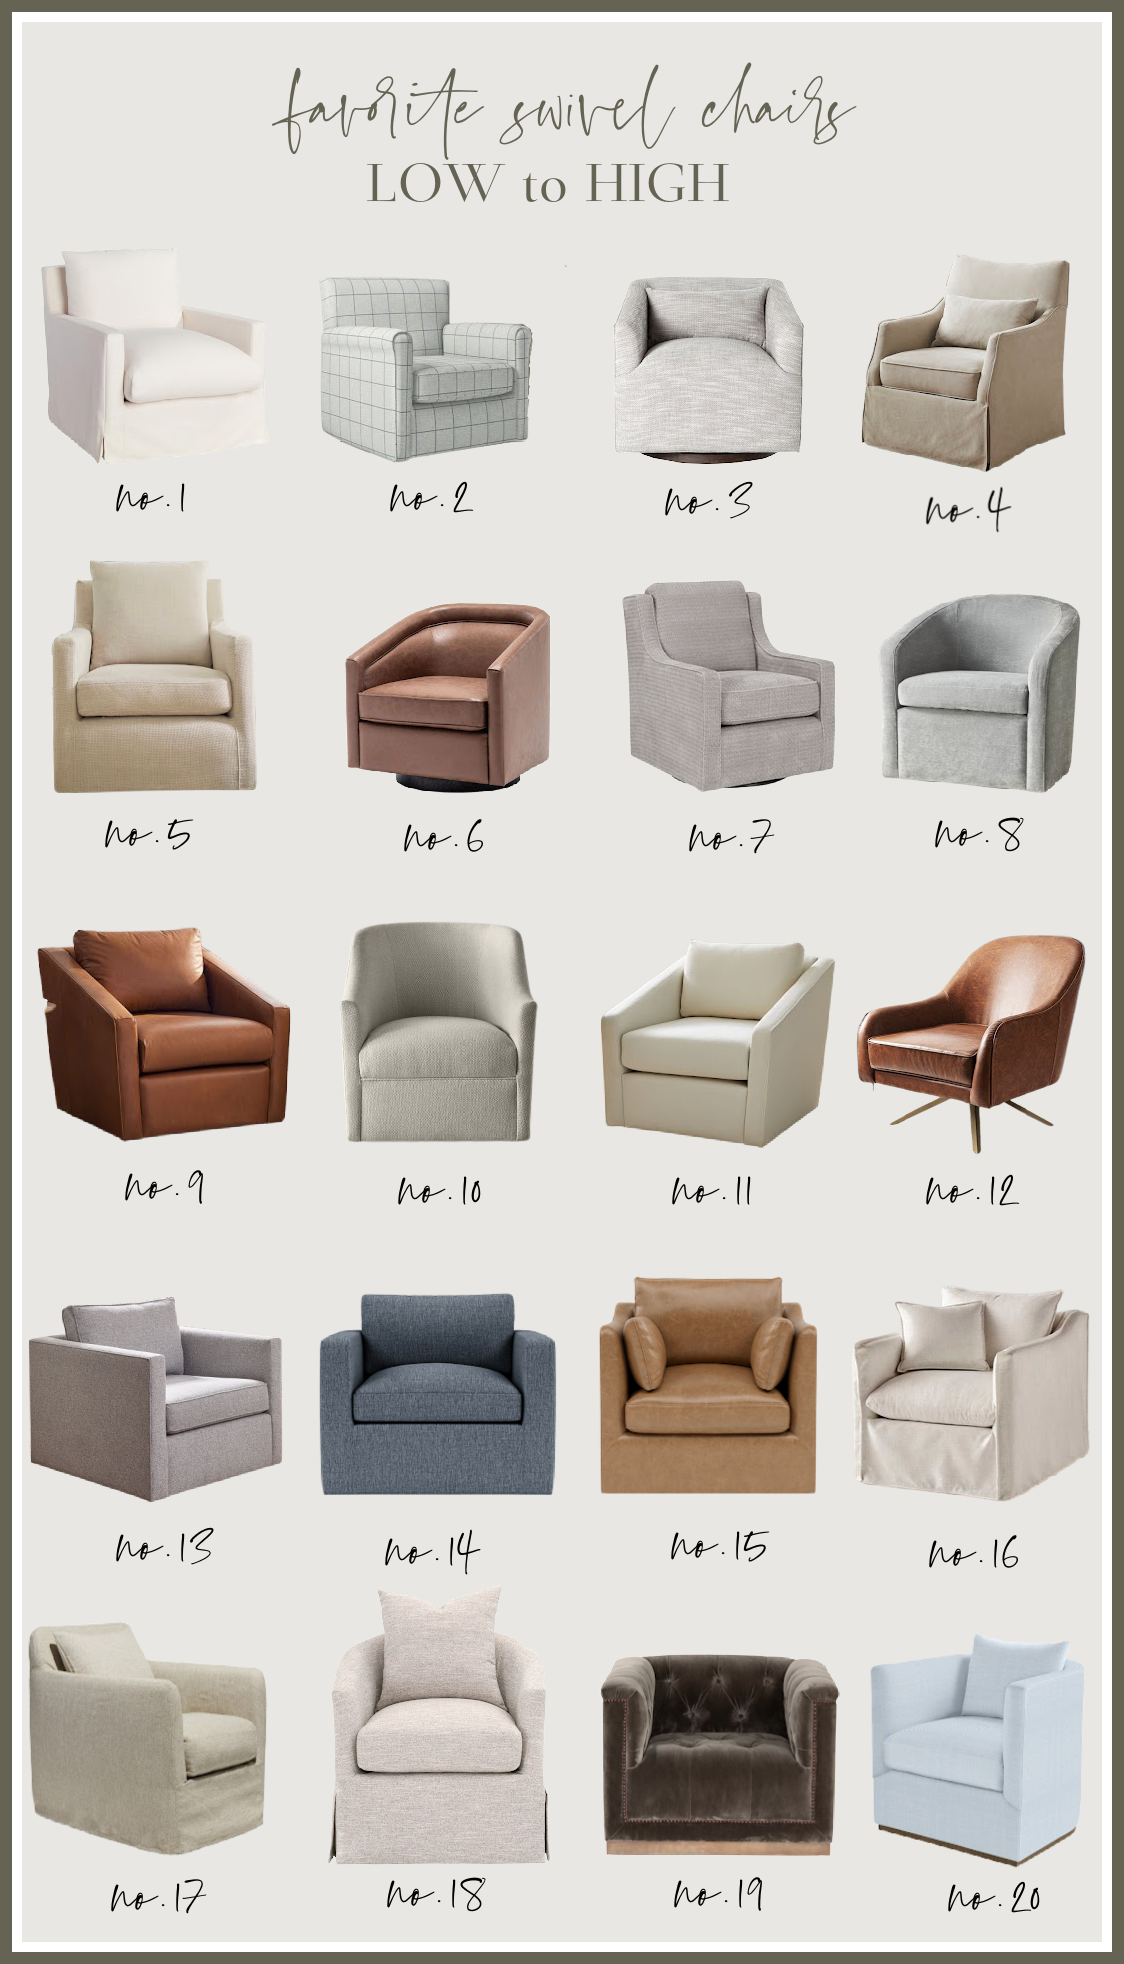 Swivel Chairs For Any Style-Low to High